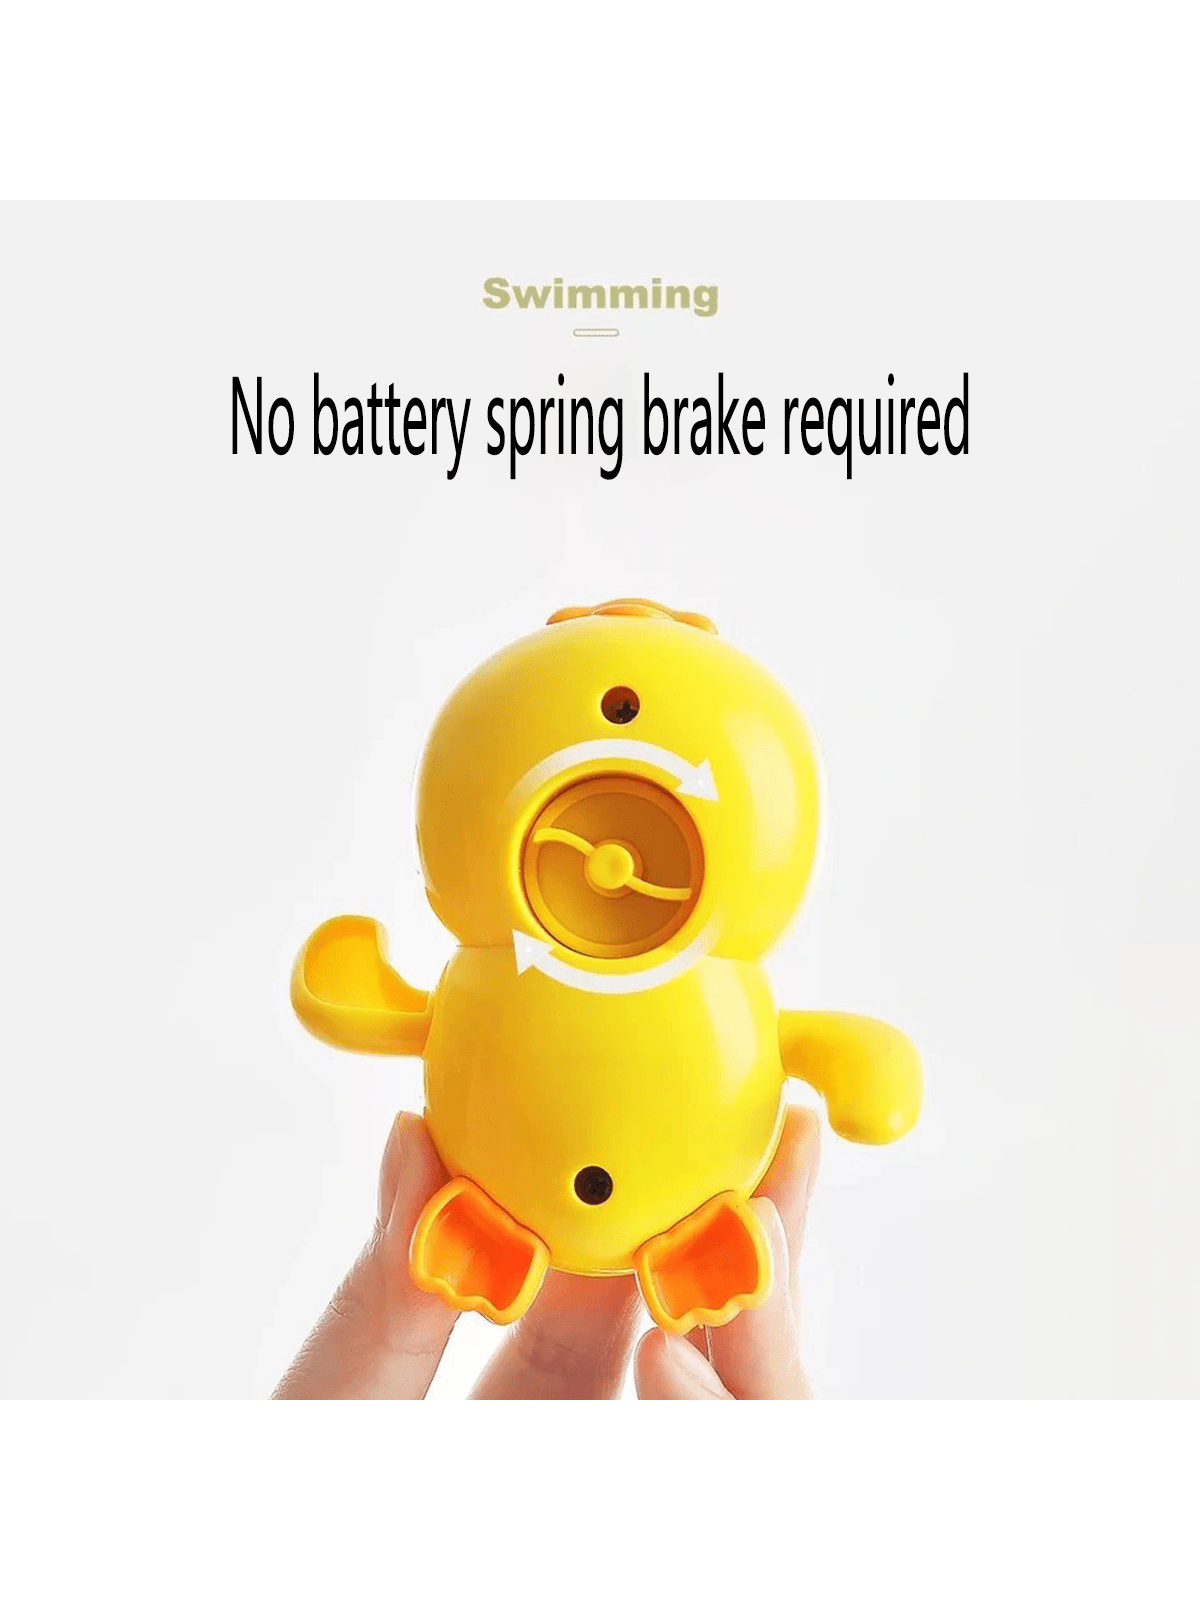 1pc Cool Animal Design Swimming Pool Toy (Dolphin, Turtle, Duck) With Wind-Up Chain For Bathing